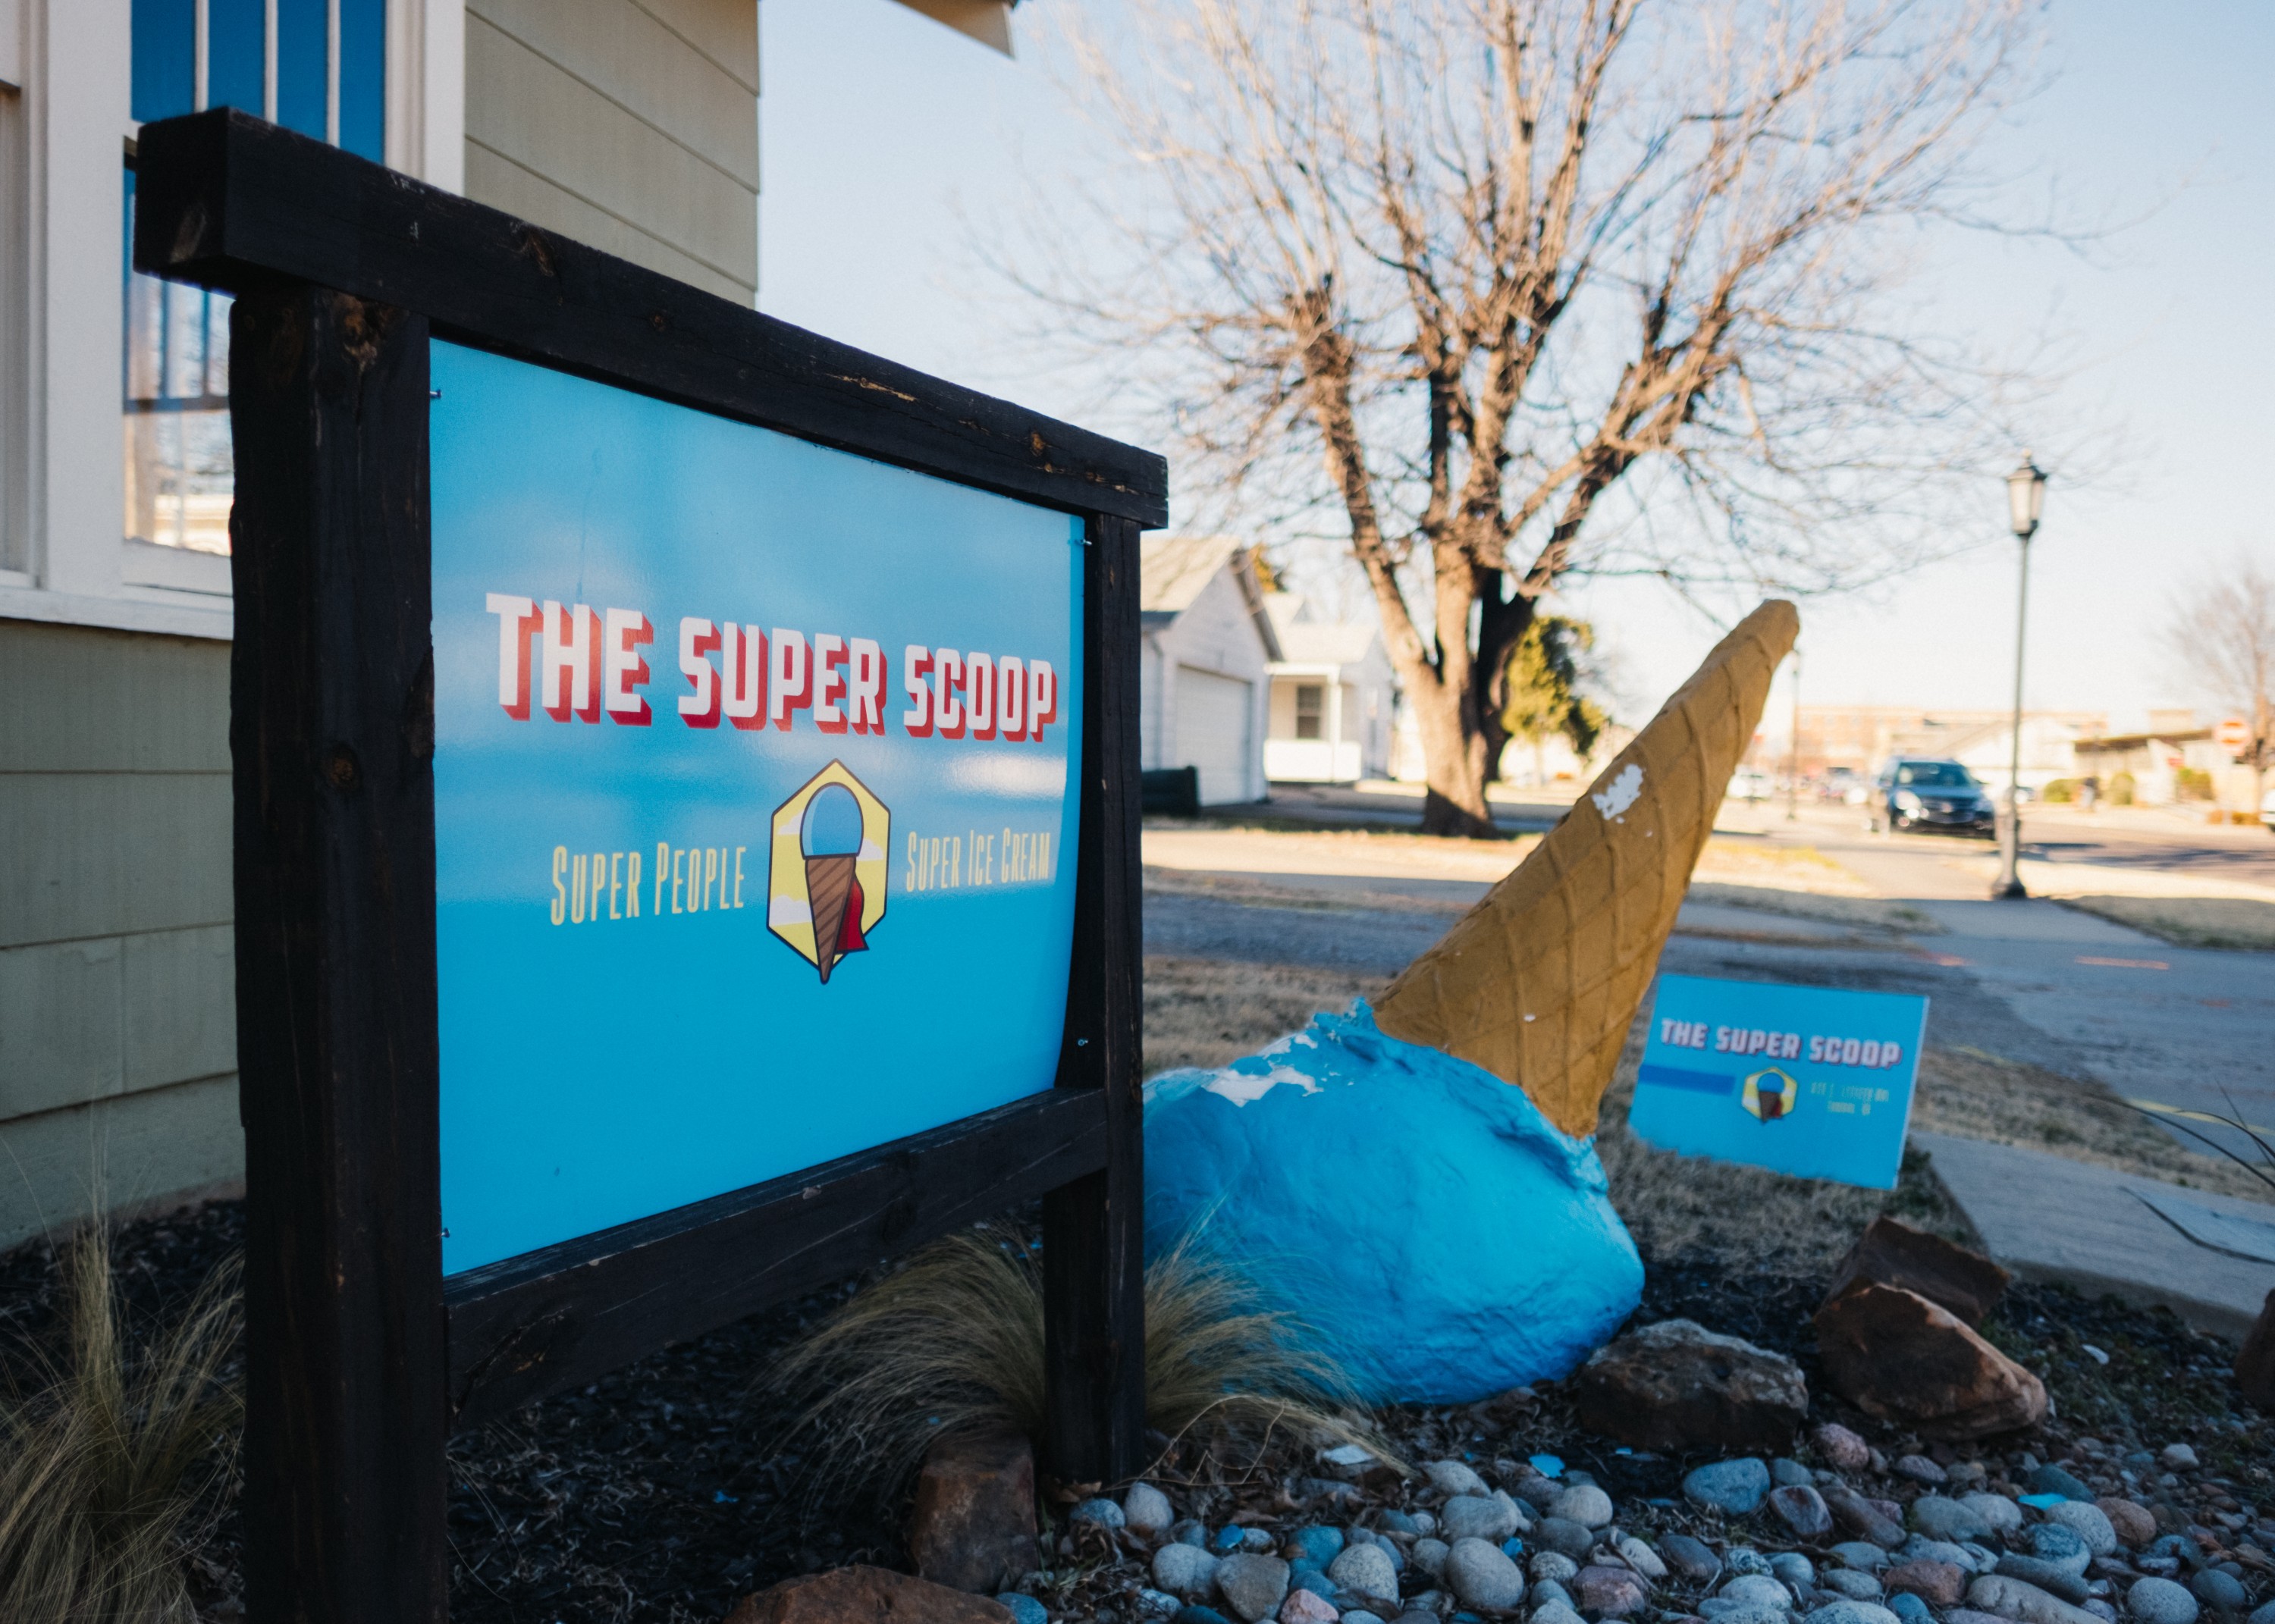 The store front of The Super Scoop, an ice cream store in Edmond